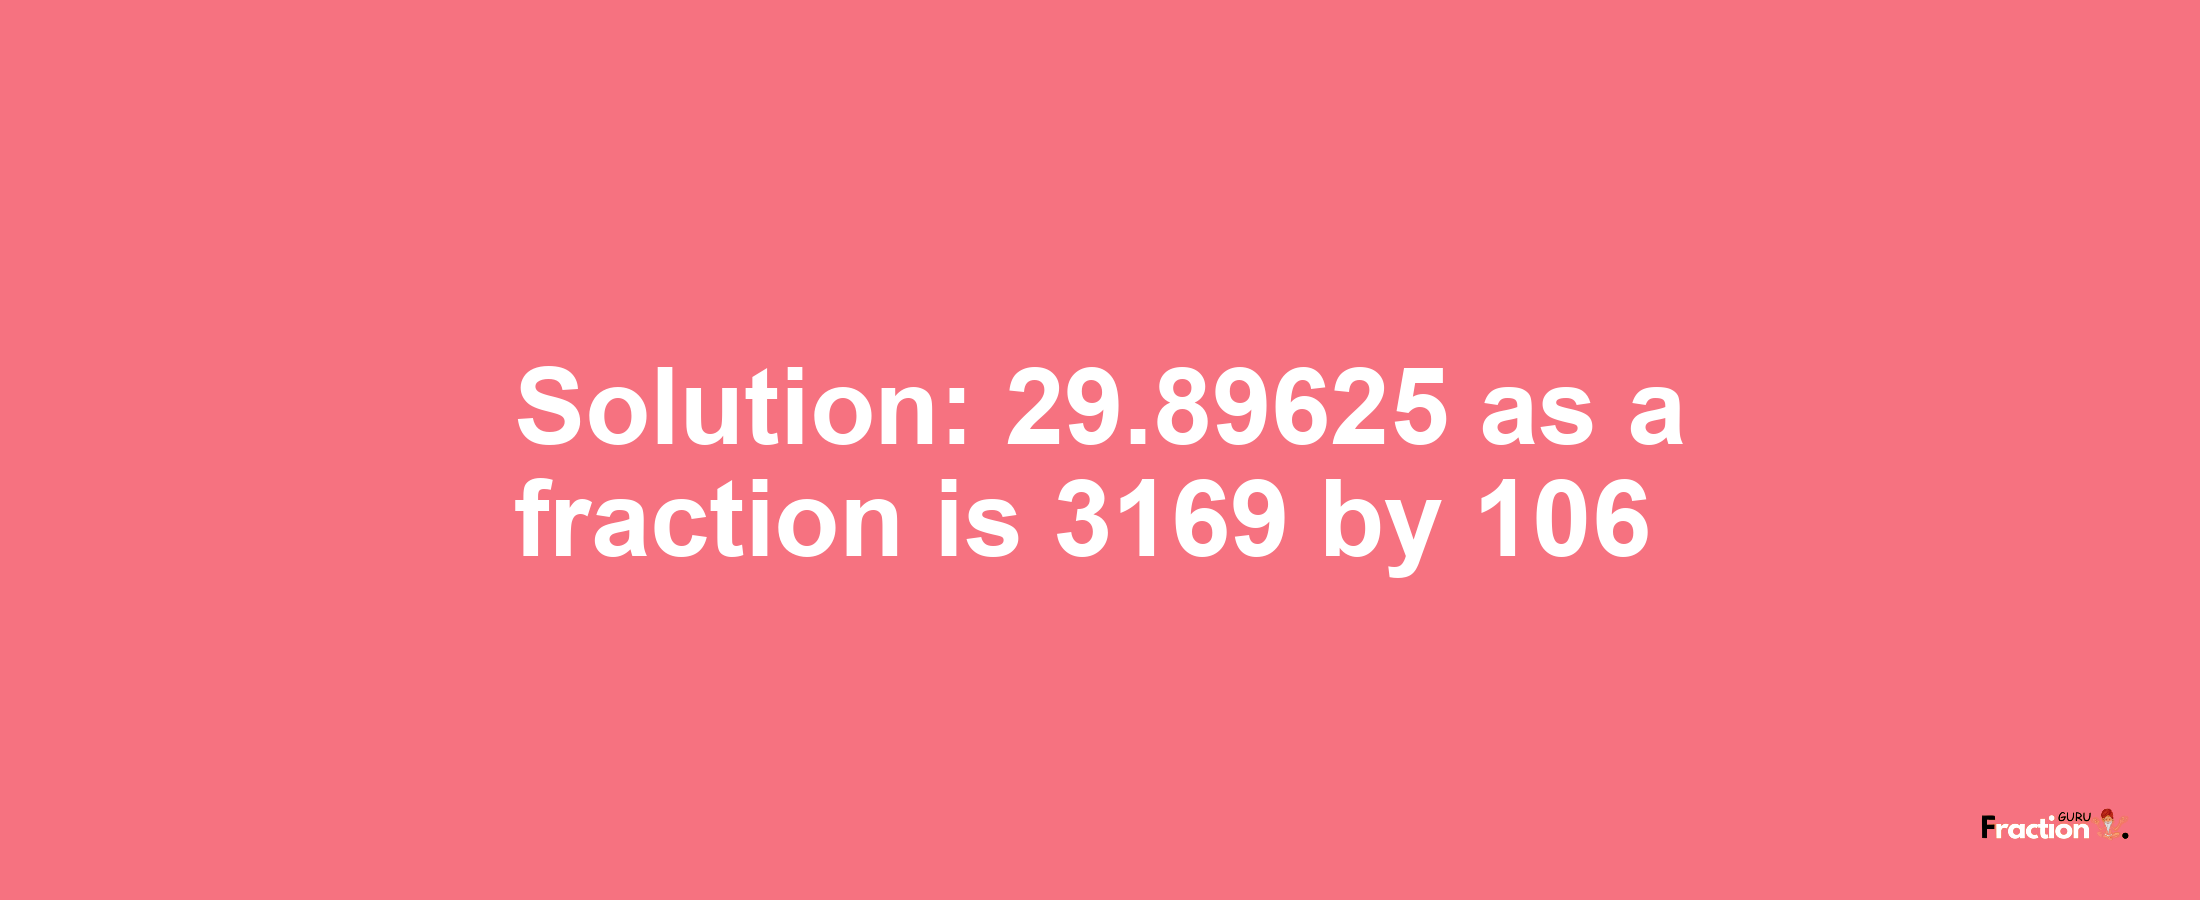 Solution:29.89625 as a fraction is 3169/106